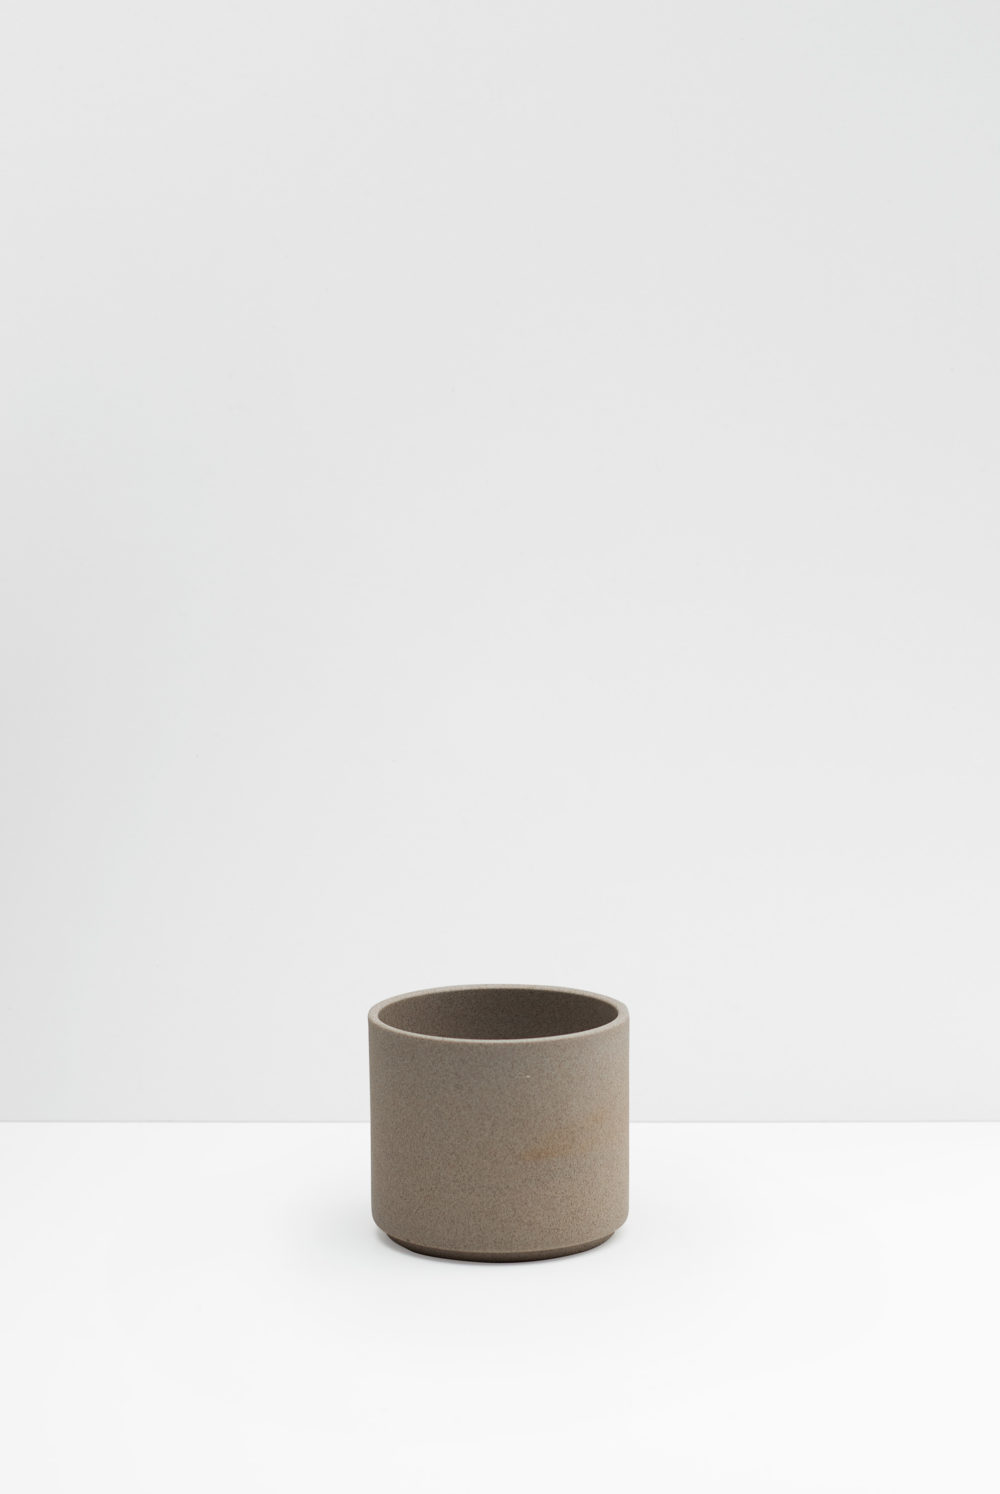 Hasami Porcelain Coffee Cup